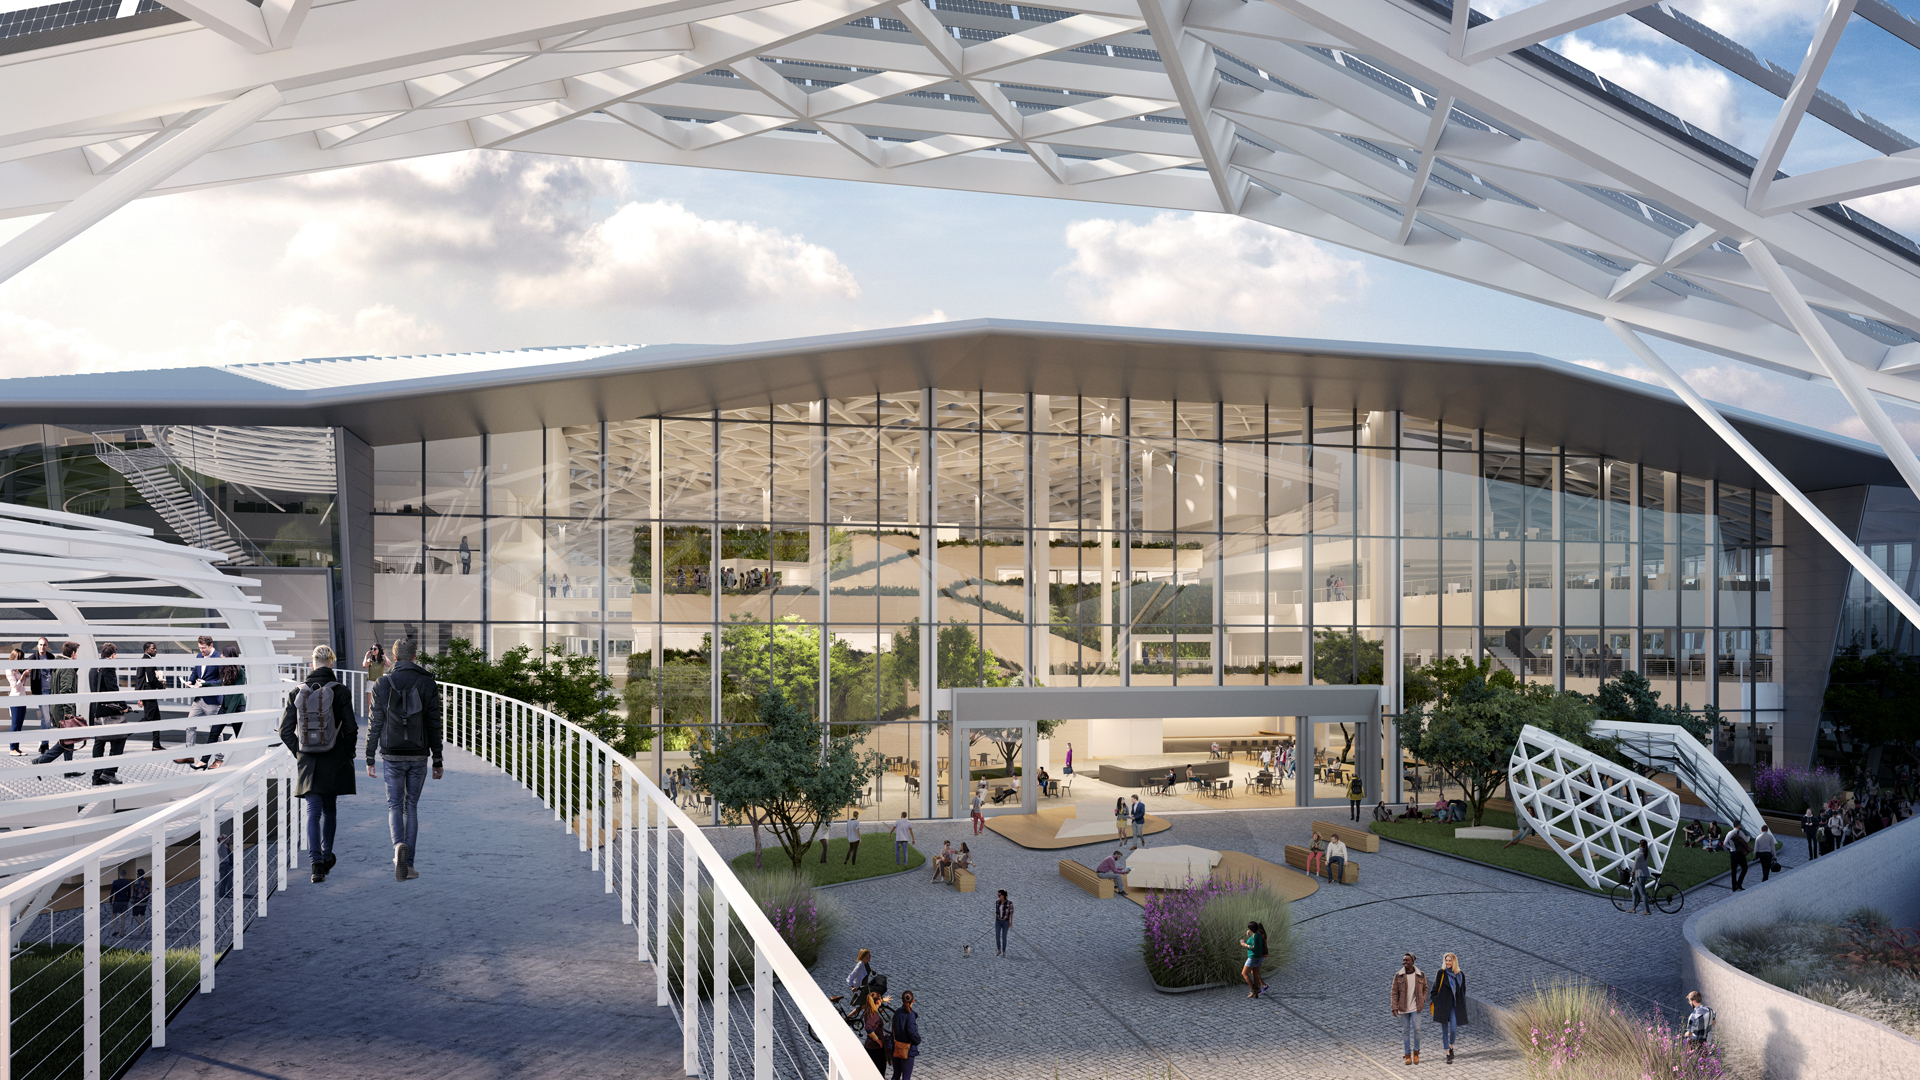 This is the first look at Nvidia's wild new 750,000 sq ft building ...